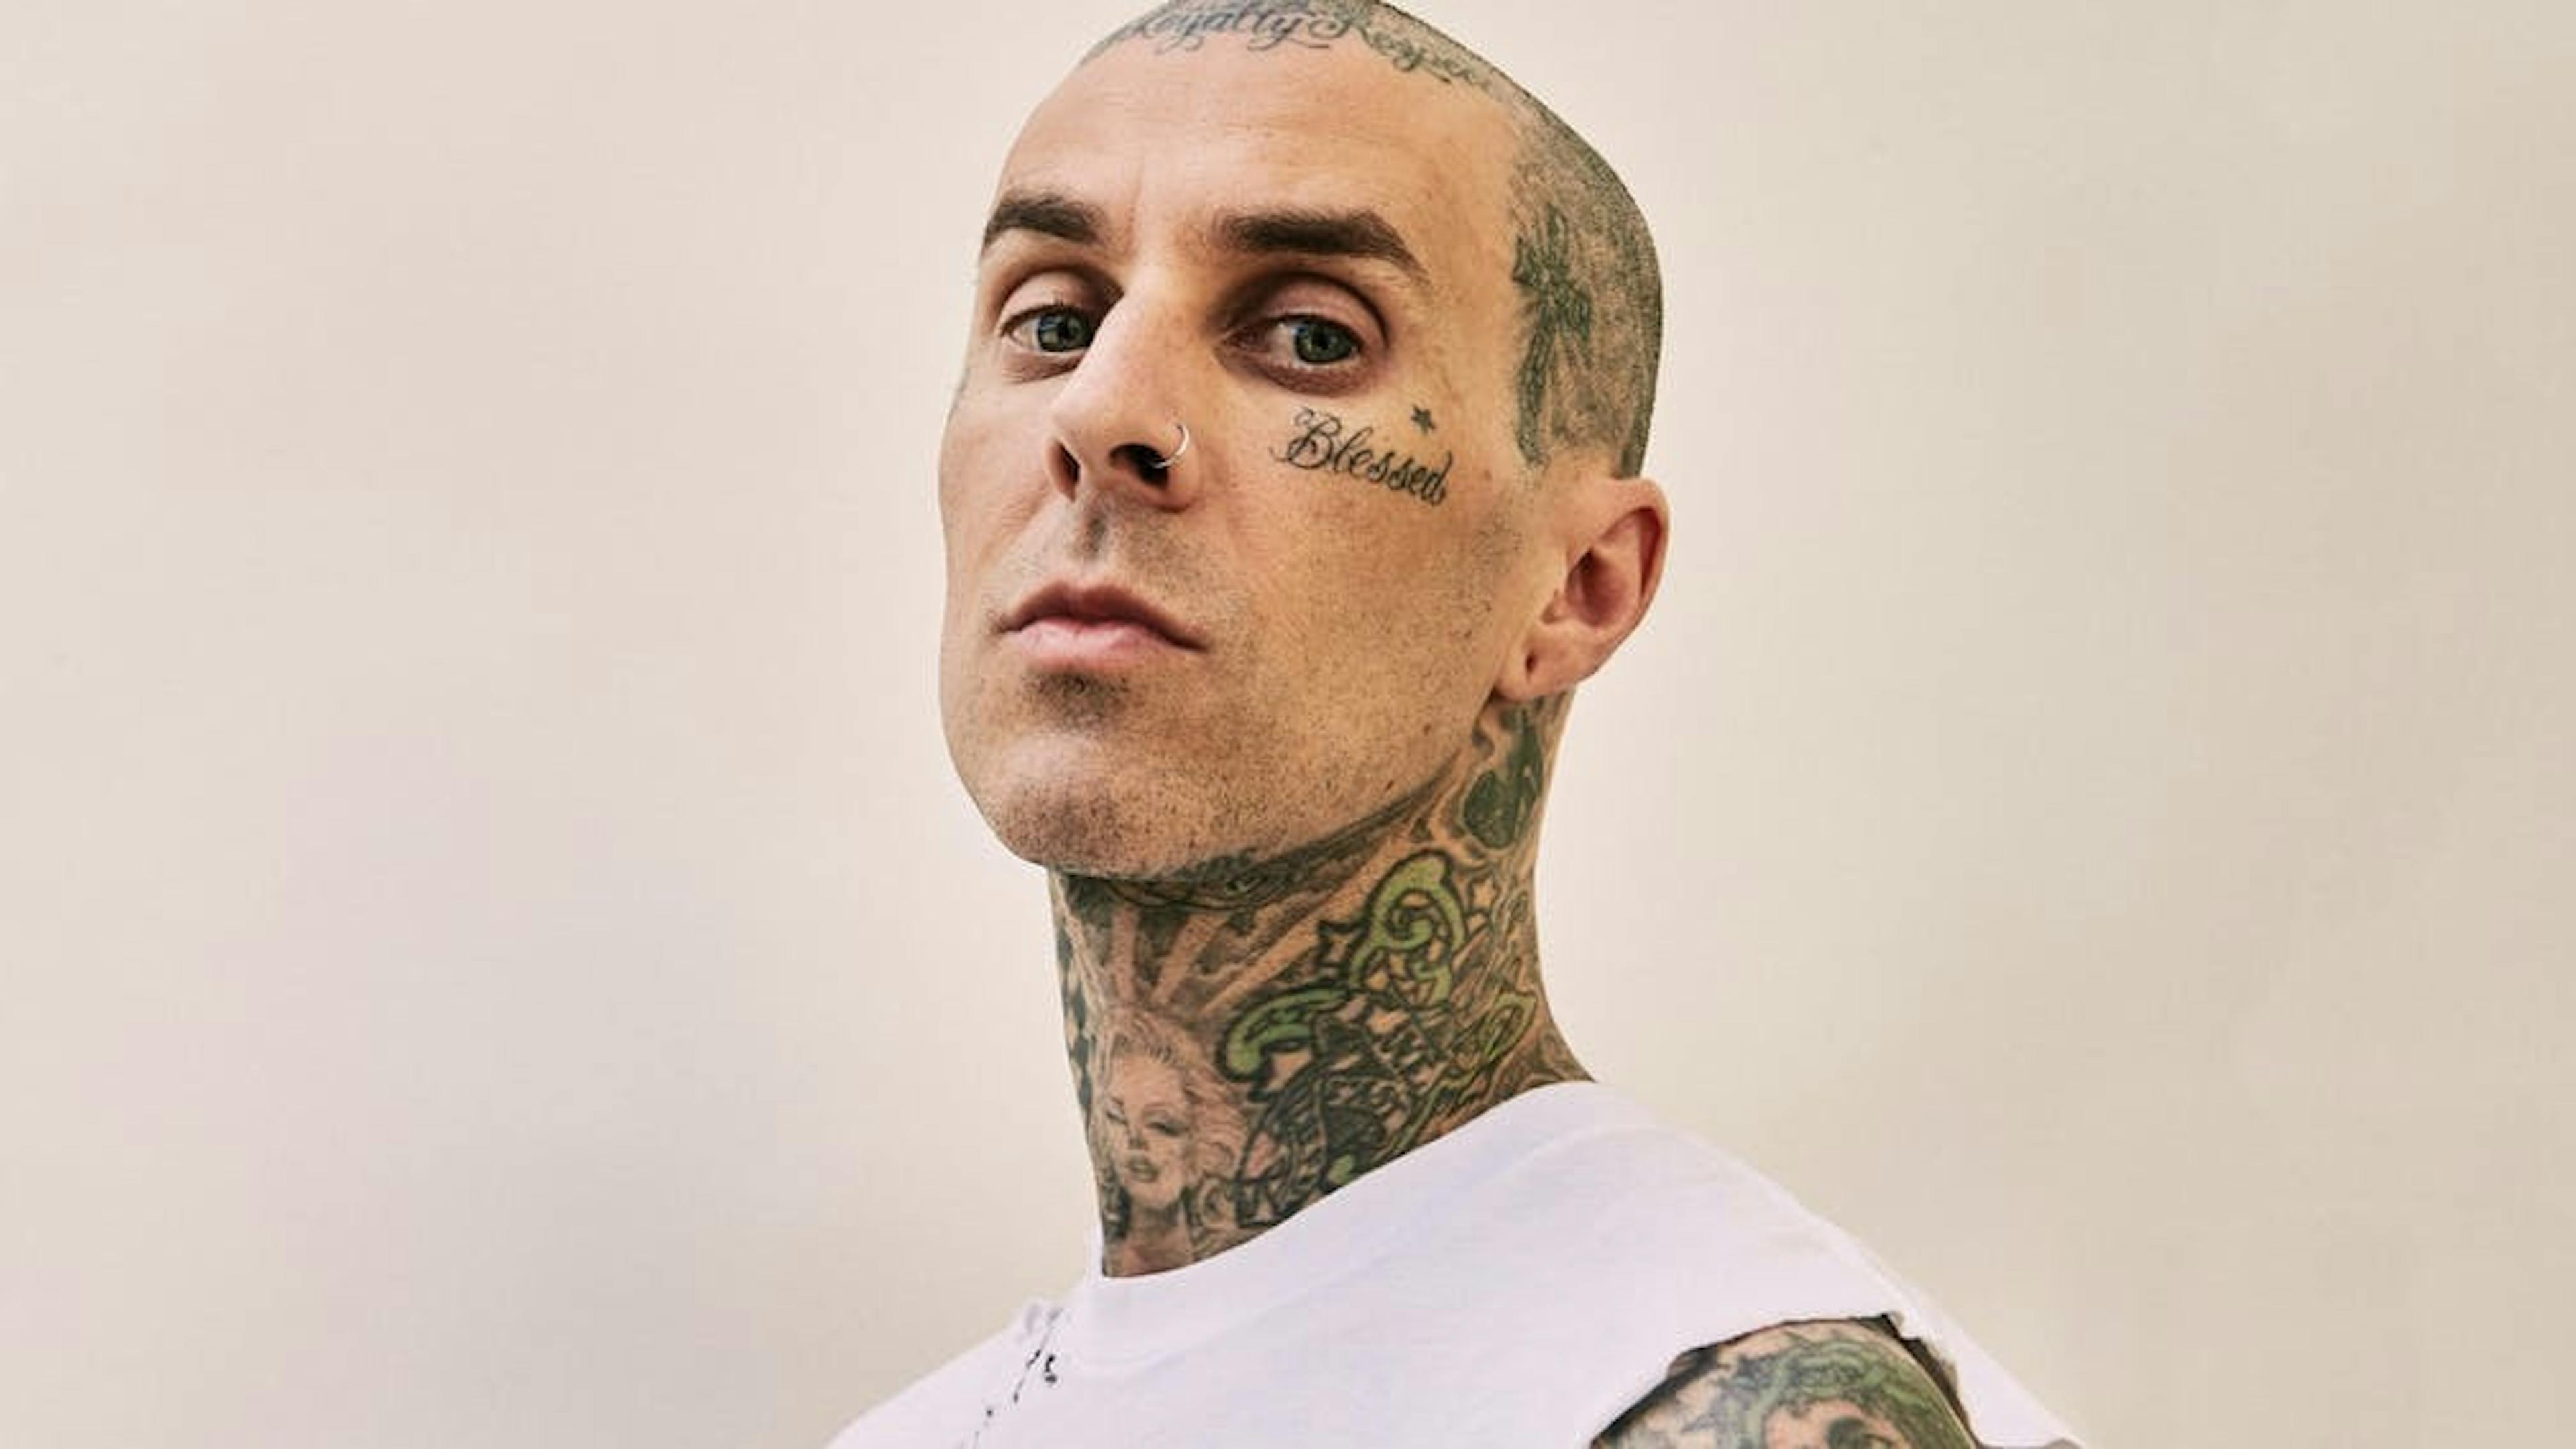 blink-182’s Travis Barker: “I looked death in the face and I survived”